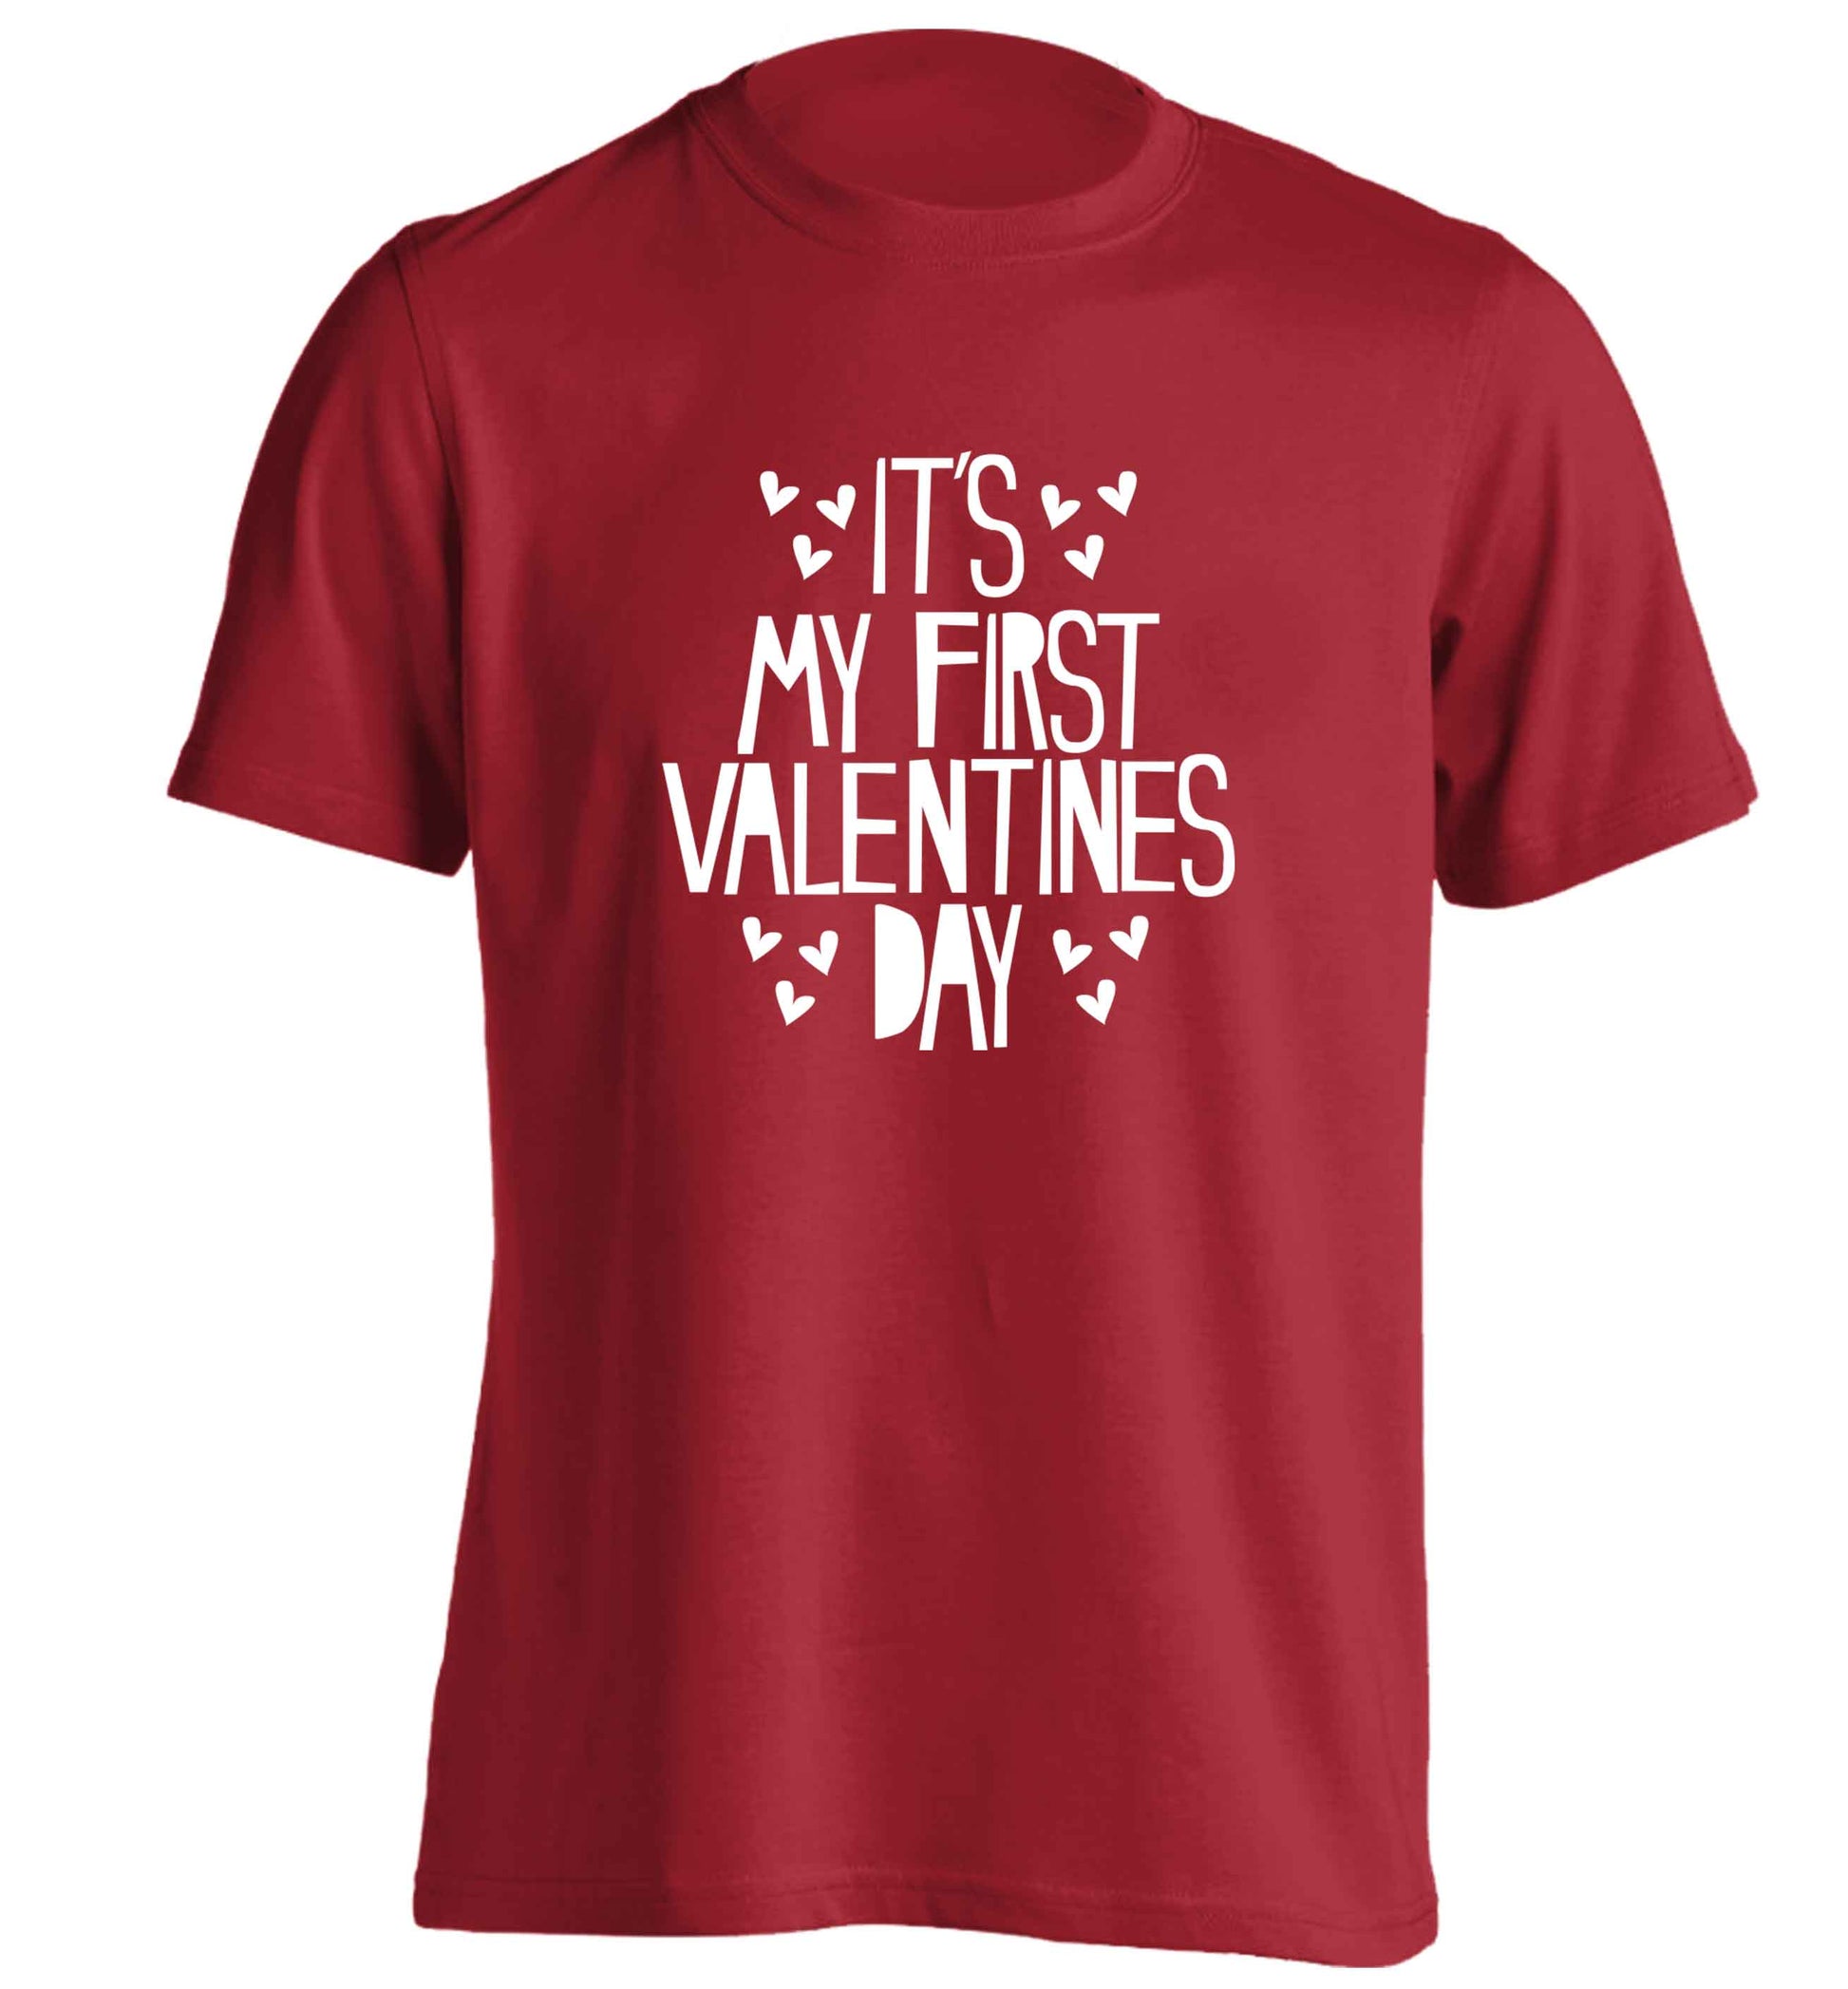 Hearts It's my First Valentine's Day adults unisex red Tshirt 2XL